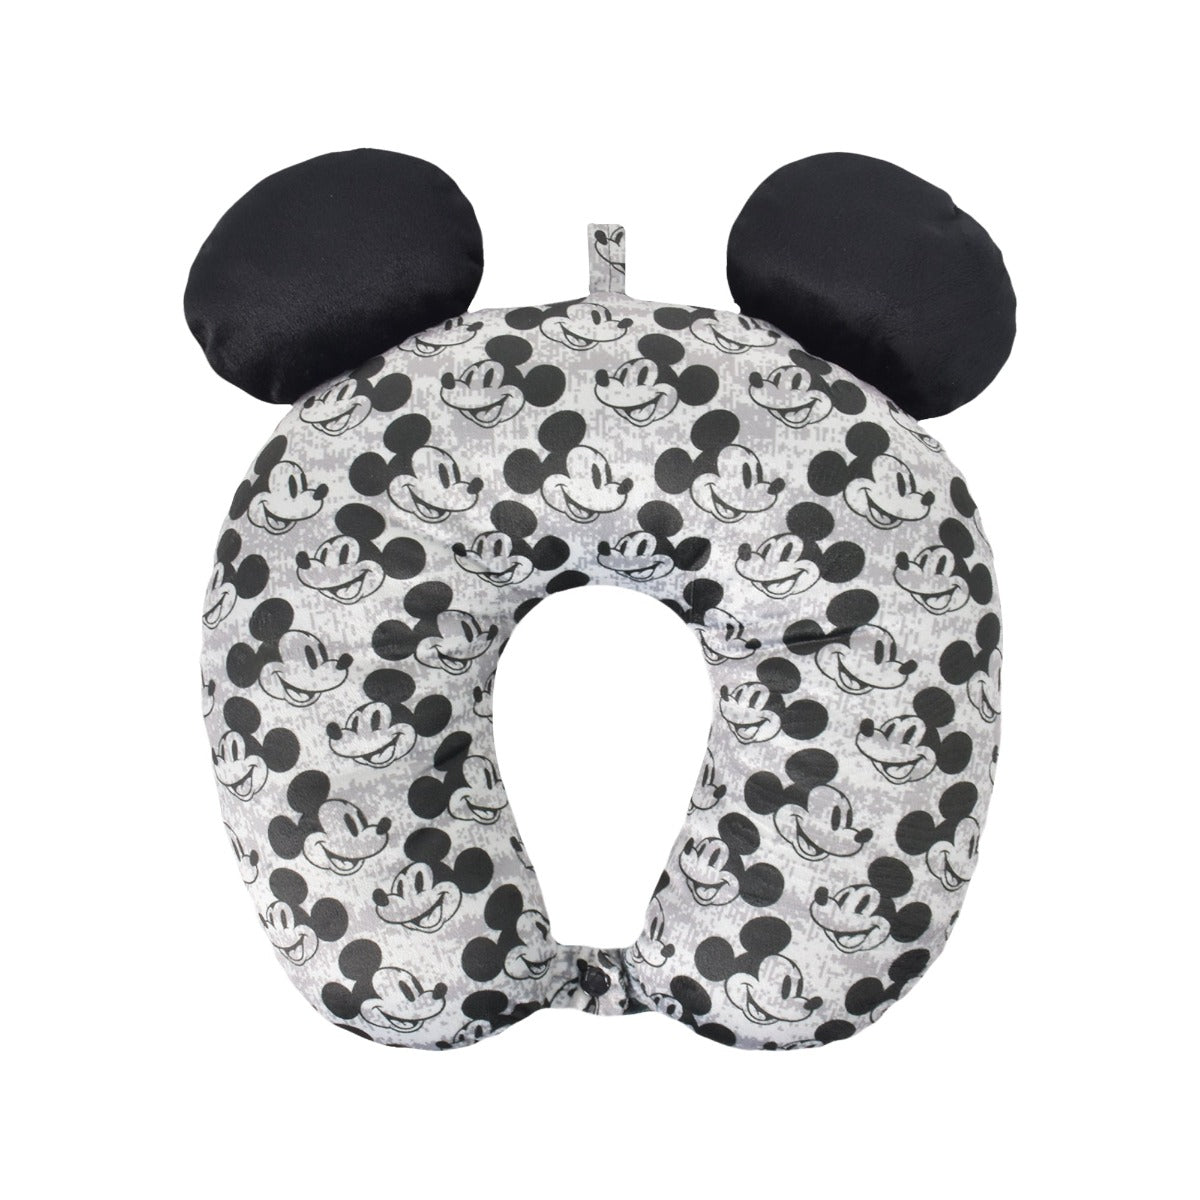 Grey Disney Ful Mickey Mouse travel neck pillow